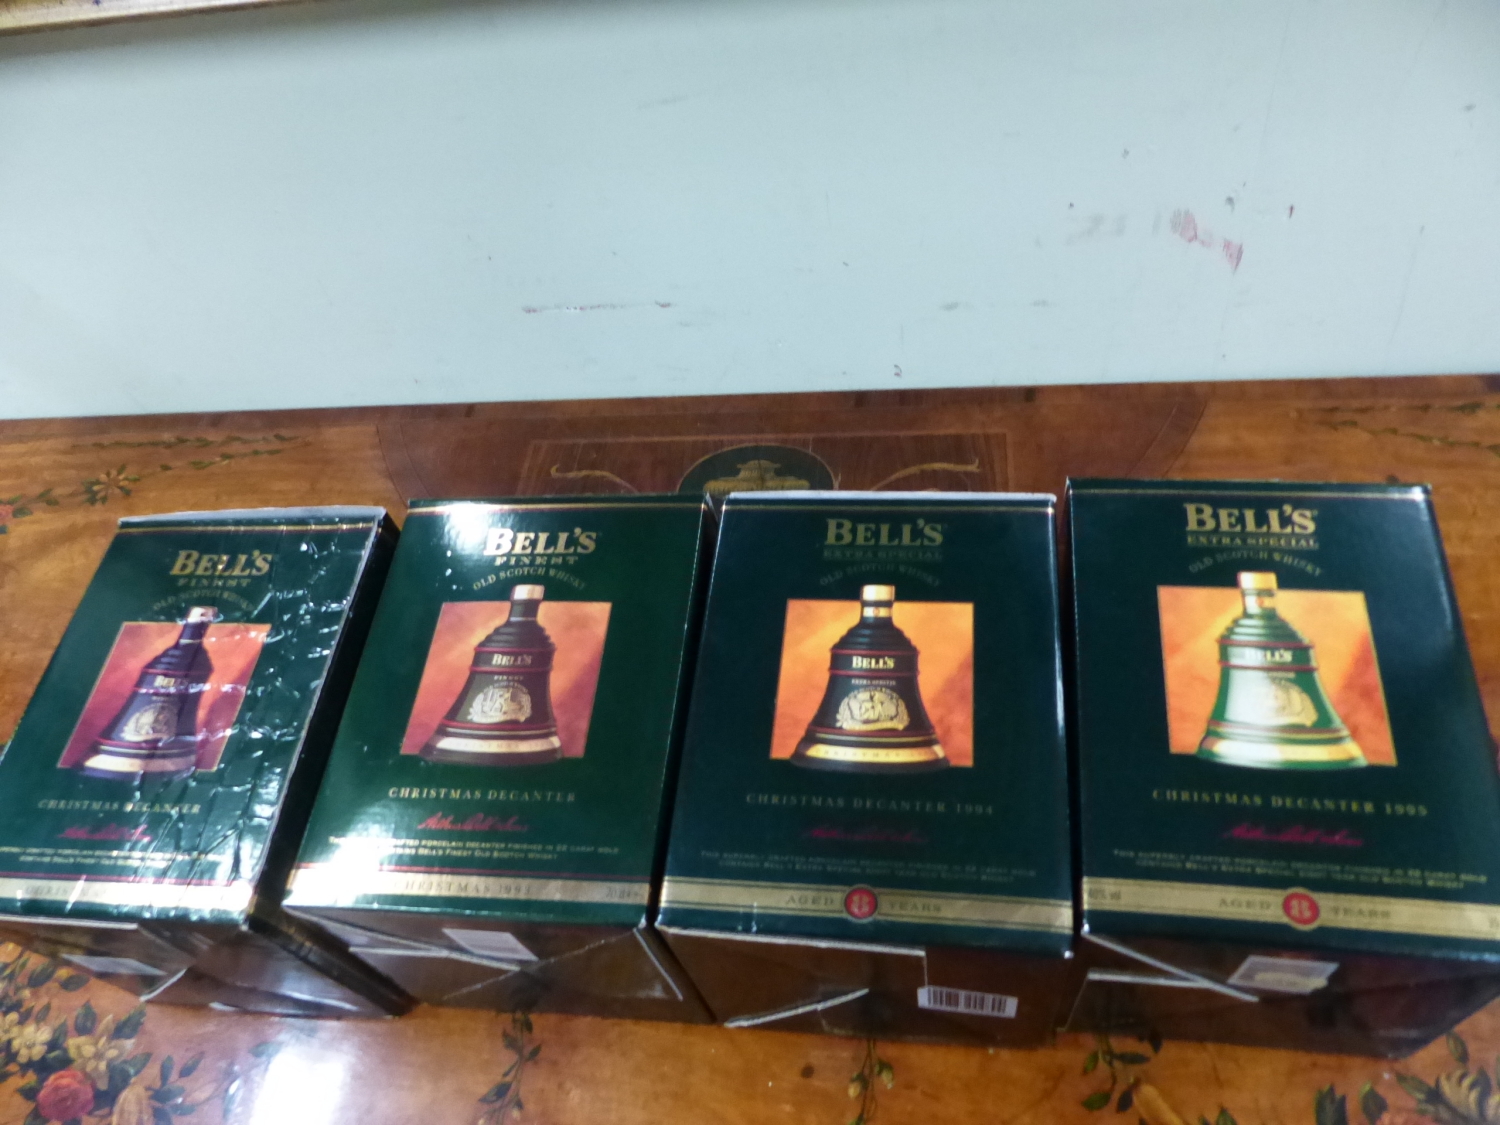 WHISKY, FOUR BOXES OF BELLS EIGHT YEAR OLD WHISKY FOR CHRISTMASES 1992-5